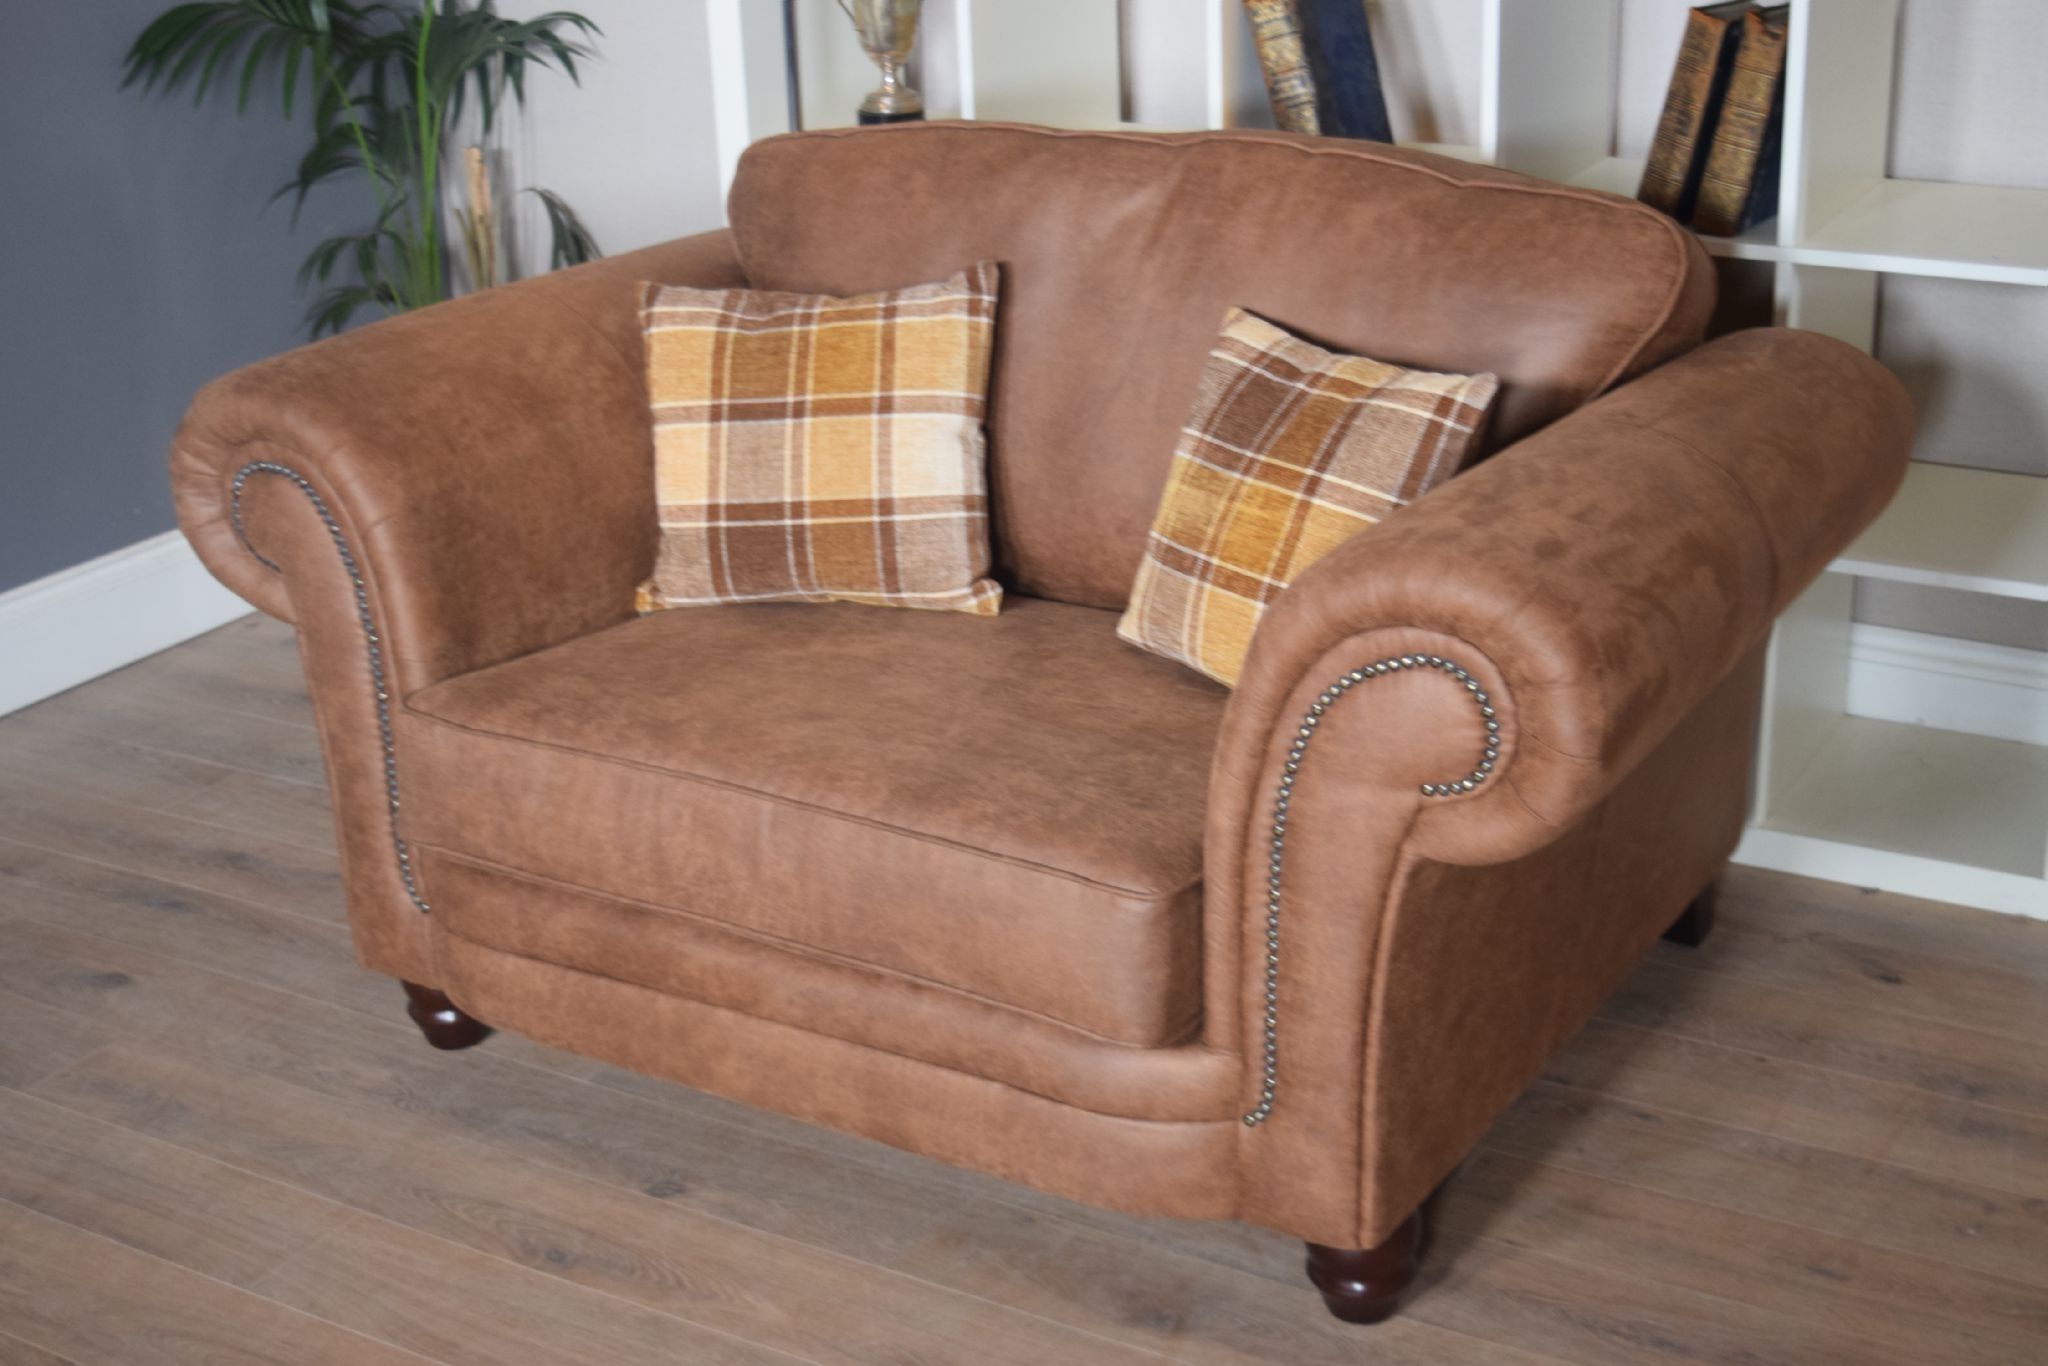 3 Seater Sofas And Cuddle Chairs With Regard To 2019 3 Seater Sofa And Cuddle Chair (View 8 of 20)